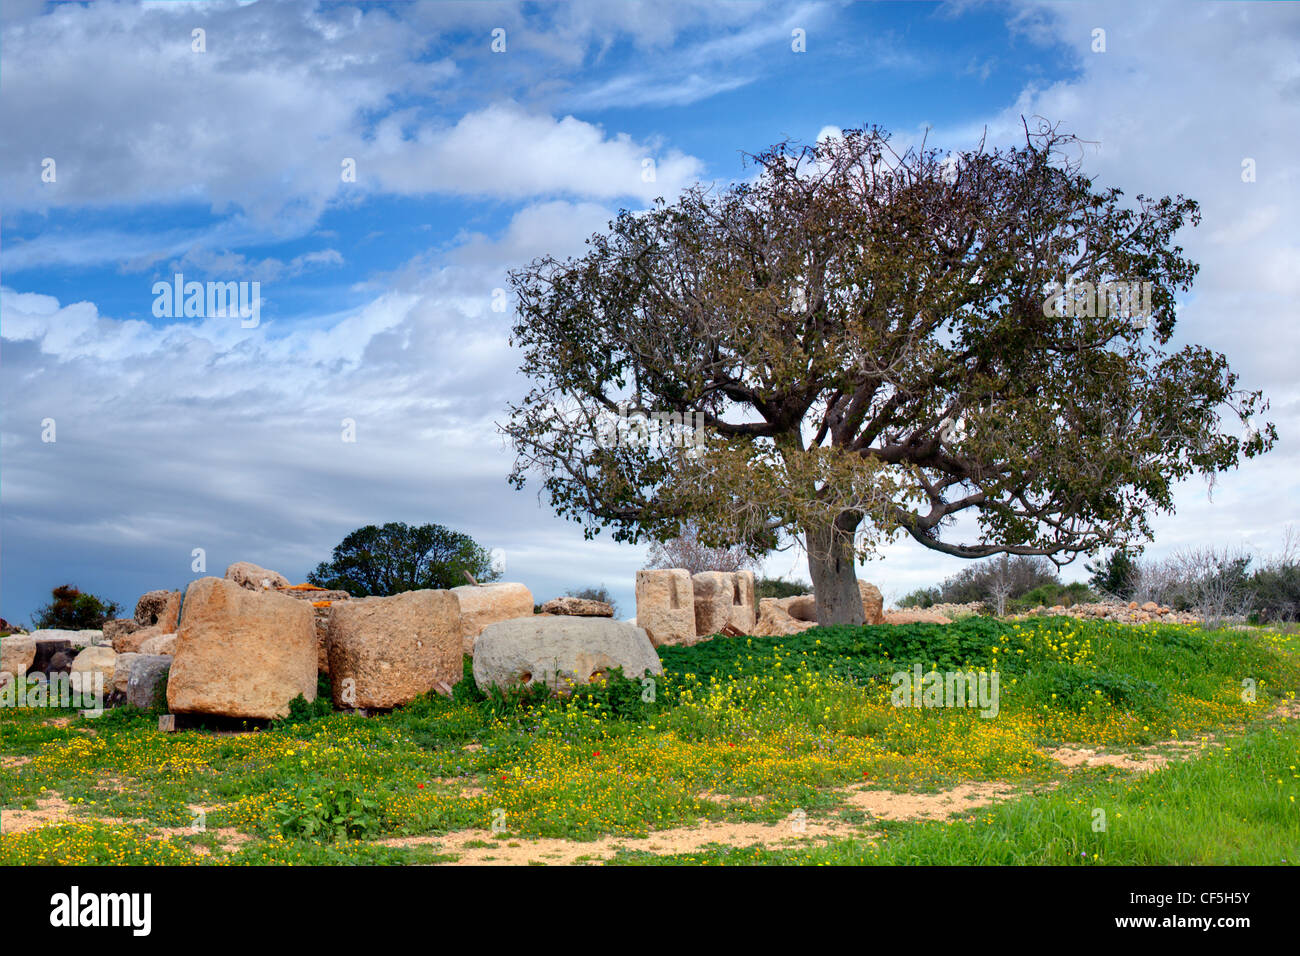 Archeological ruins in Beit Guvrin national Park, Israel. Stock Photo